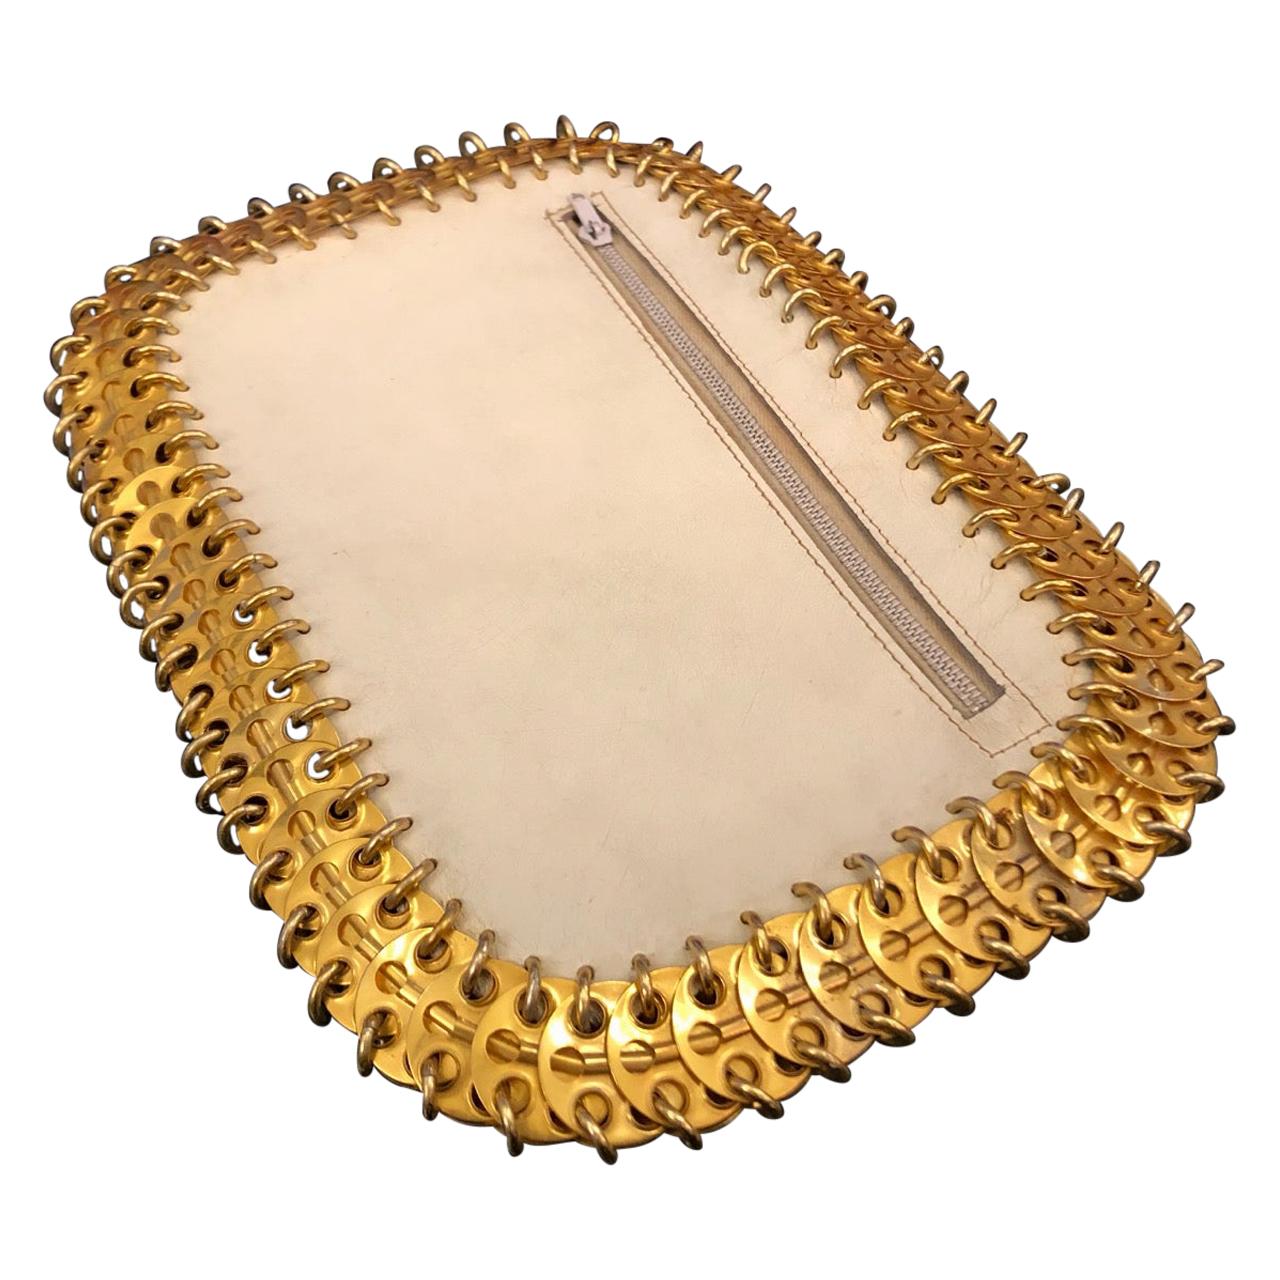 Paco Rabanne, 1960s Vintage White Leather & brass Discs clutch bag, Labels